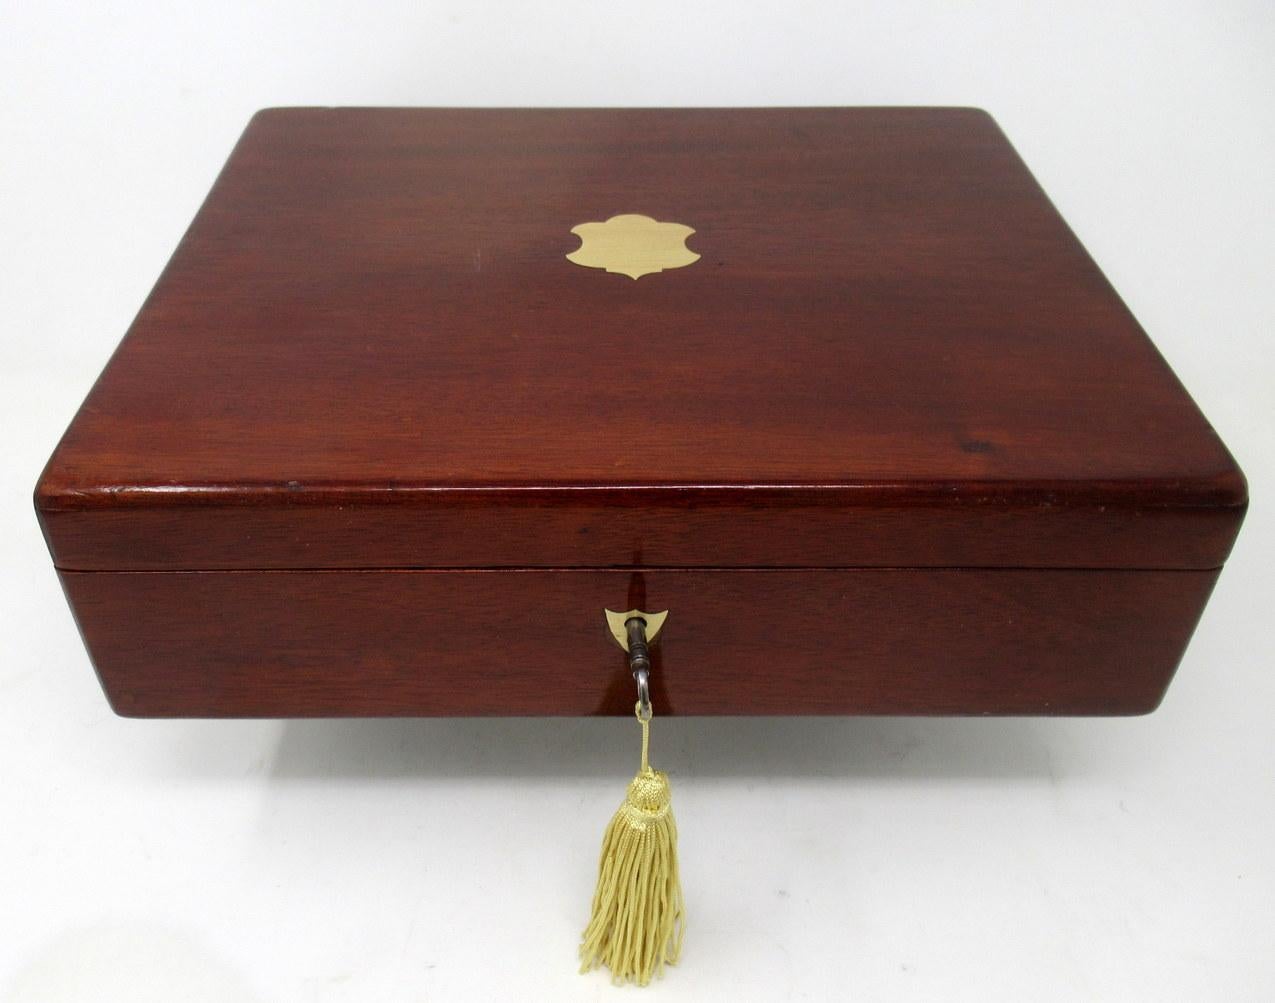 An Exceptionally Fine Quality English Well Figured Solid Mahogany Ladies or Gents Jewelry or Storage Box of outstanding quality and medium proportions, with decorative vacant initial plate to outer lid, flush hinges and polished brass shield form